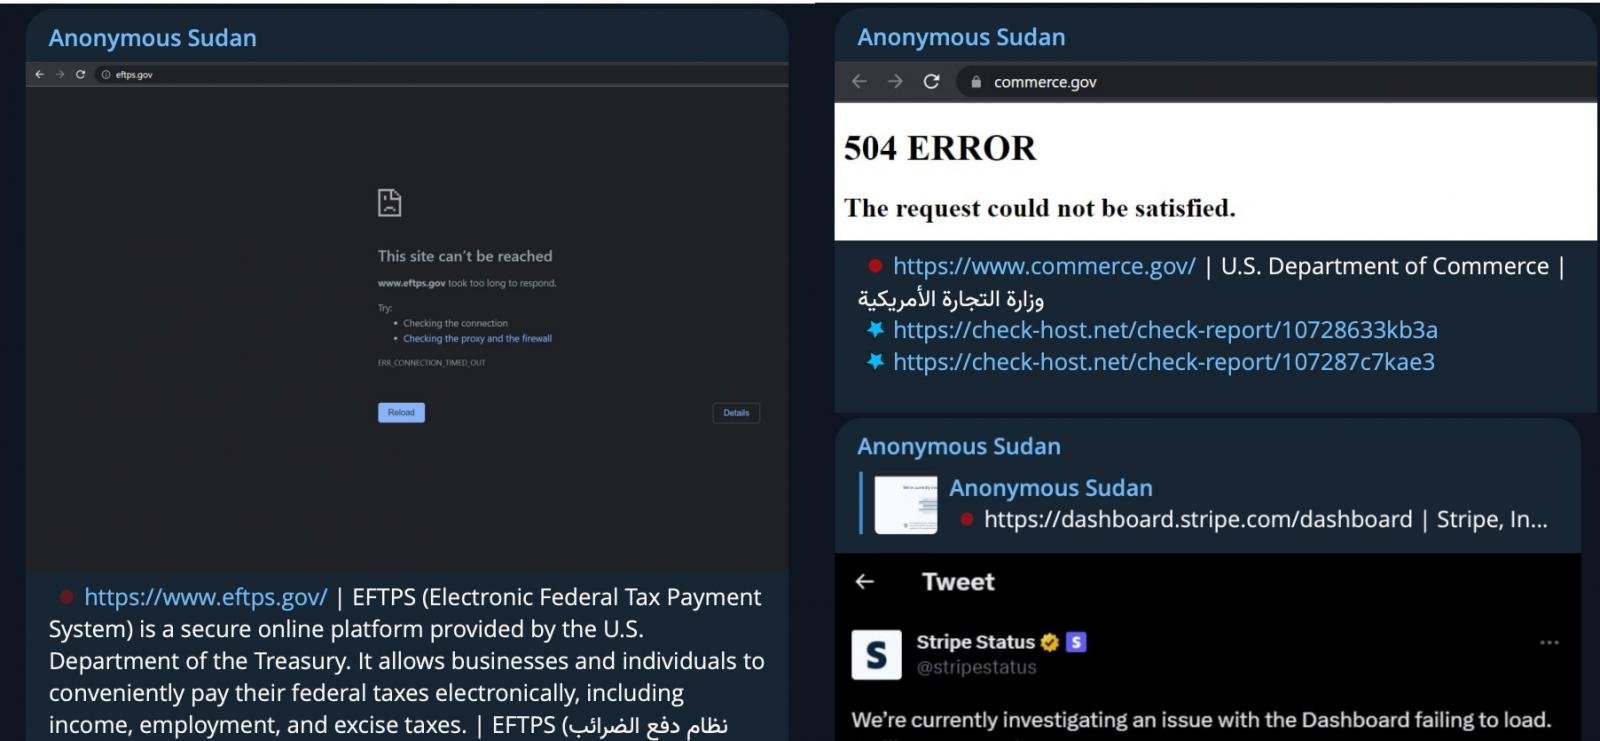 Anonymous Sudan claiming to attack US government websites